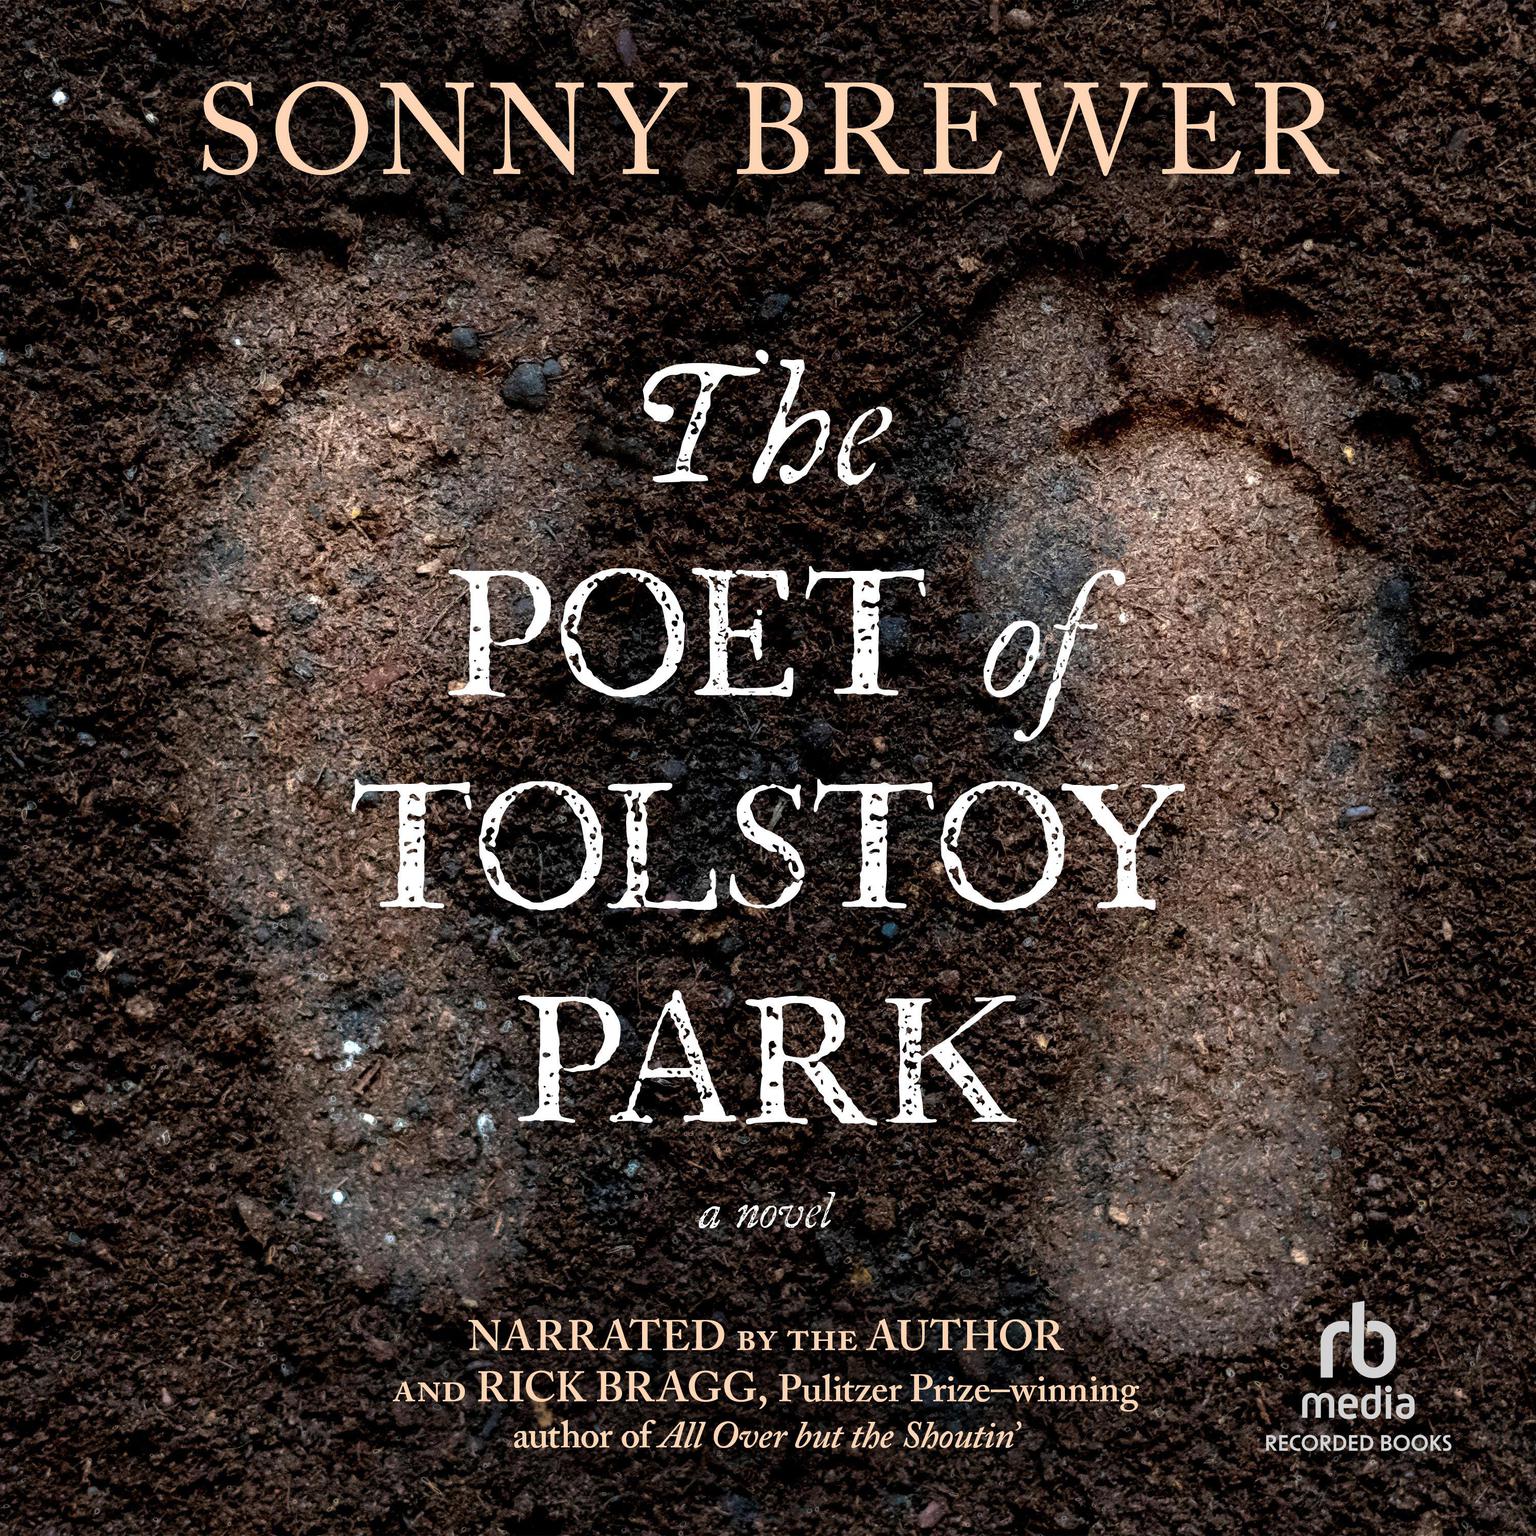 The Poet of Tolstoy Park: A Novel Audiobook, by Sonny Brewer